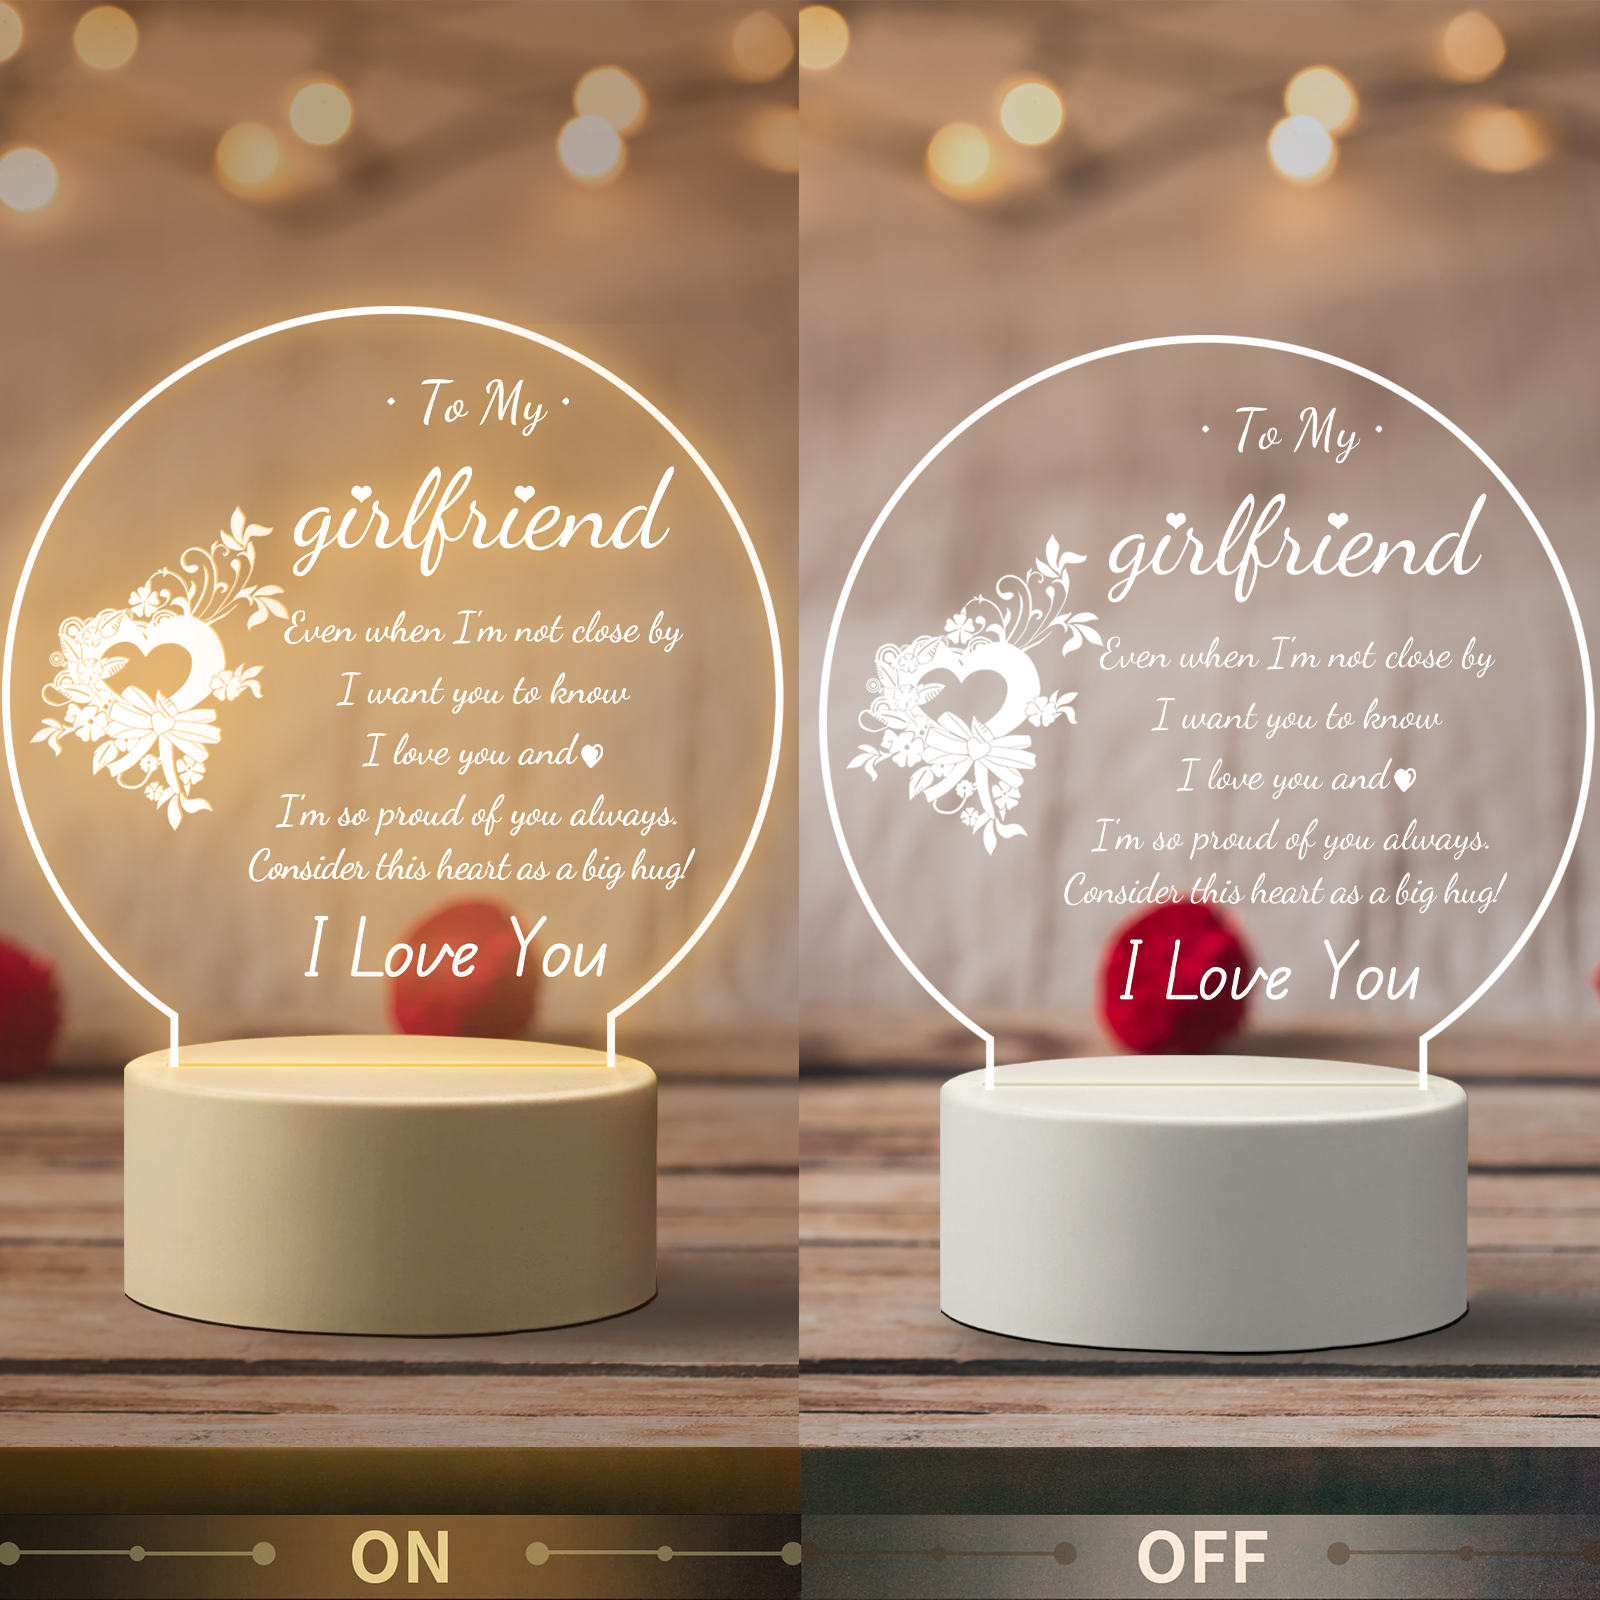 Personalized Surprise Gifts for Her, Romantic Girlfriend Birthday Gift, One  Year Anniversary Gifts for Girlfriend, Cute Gifts for Women 